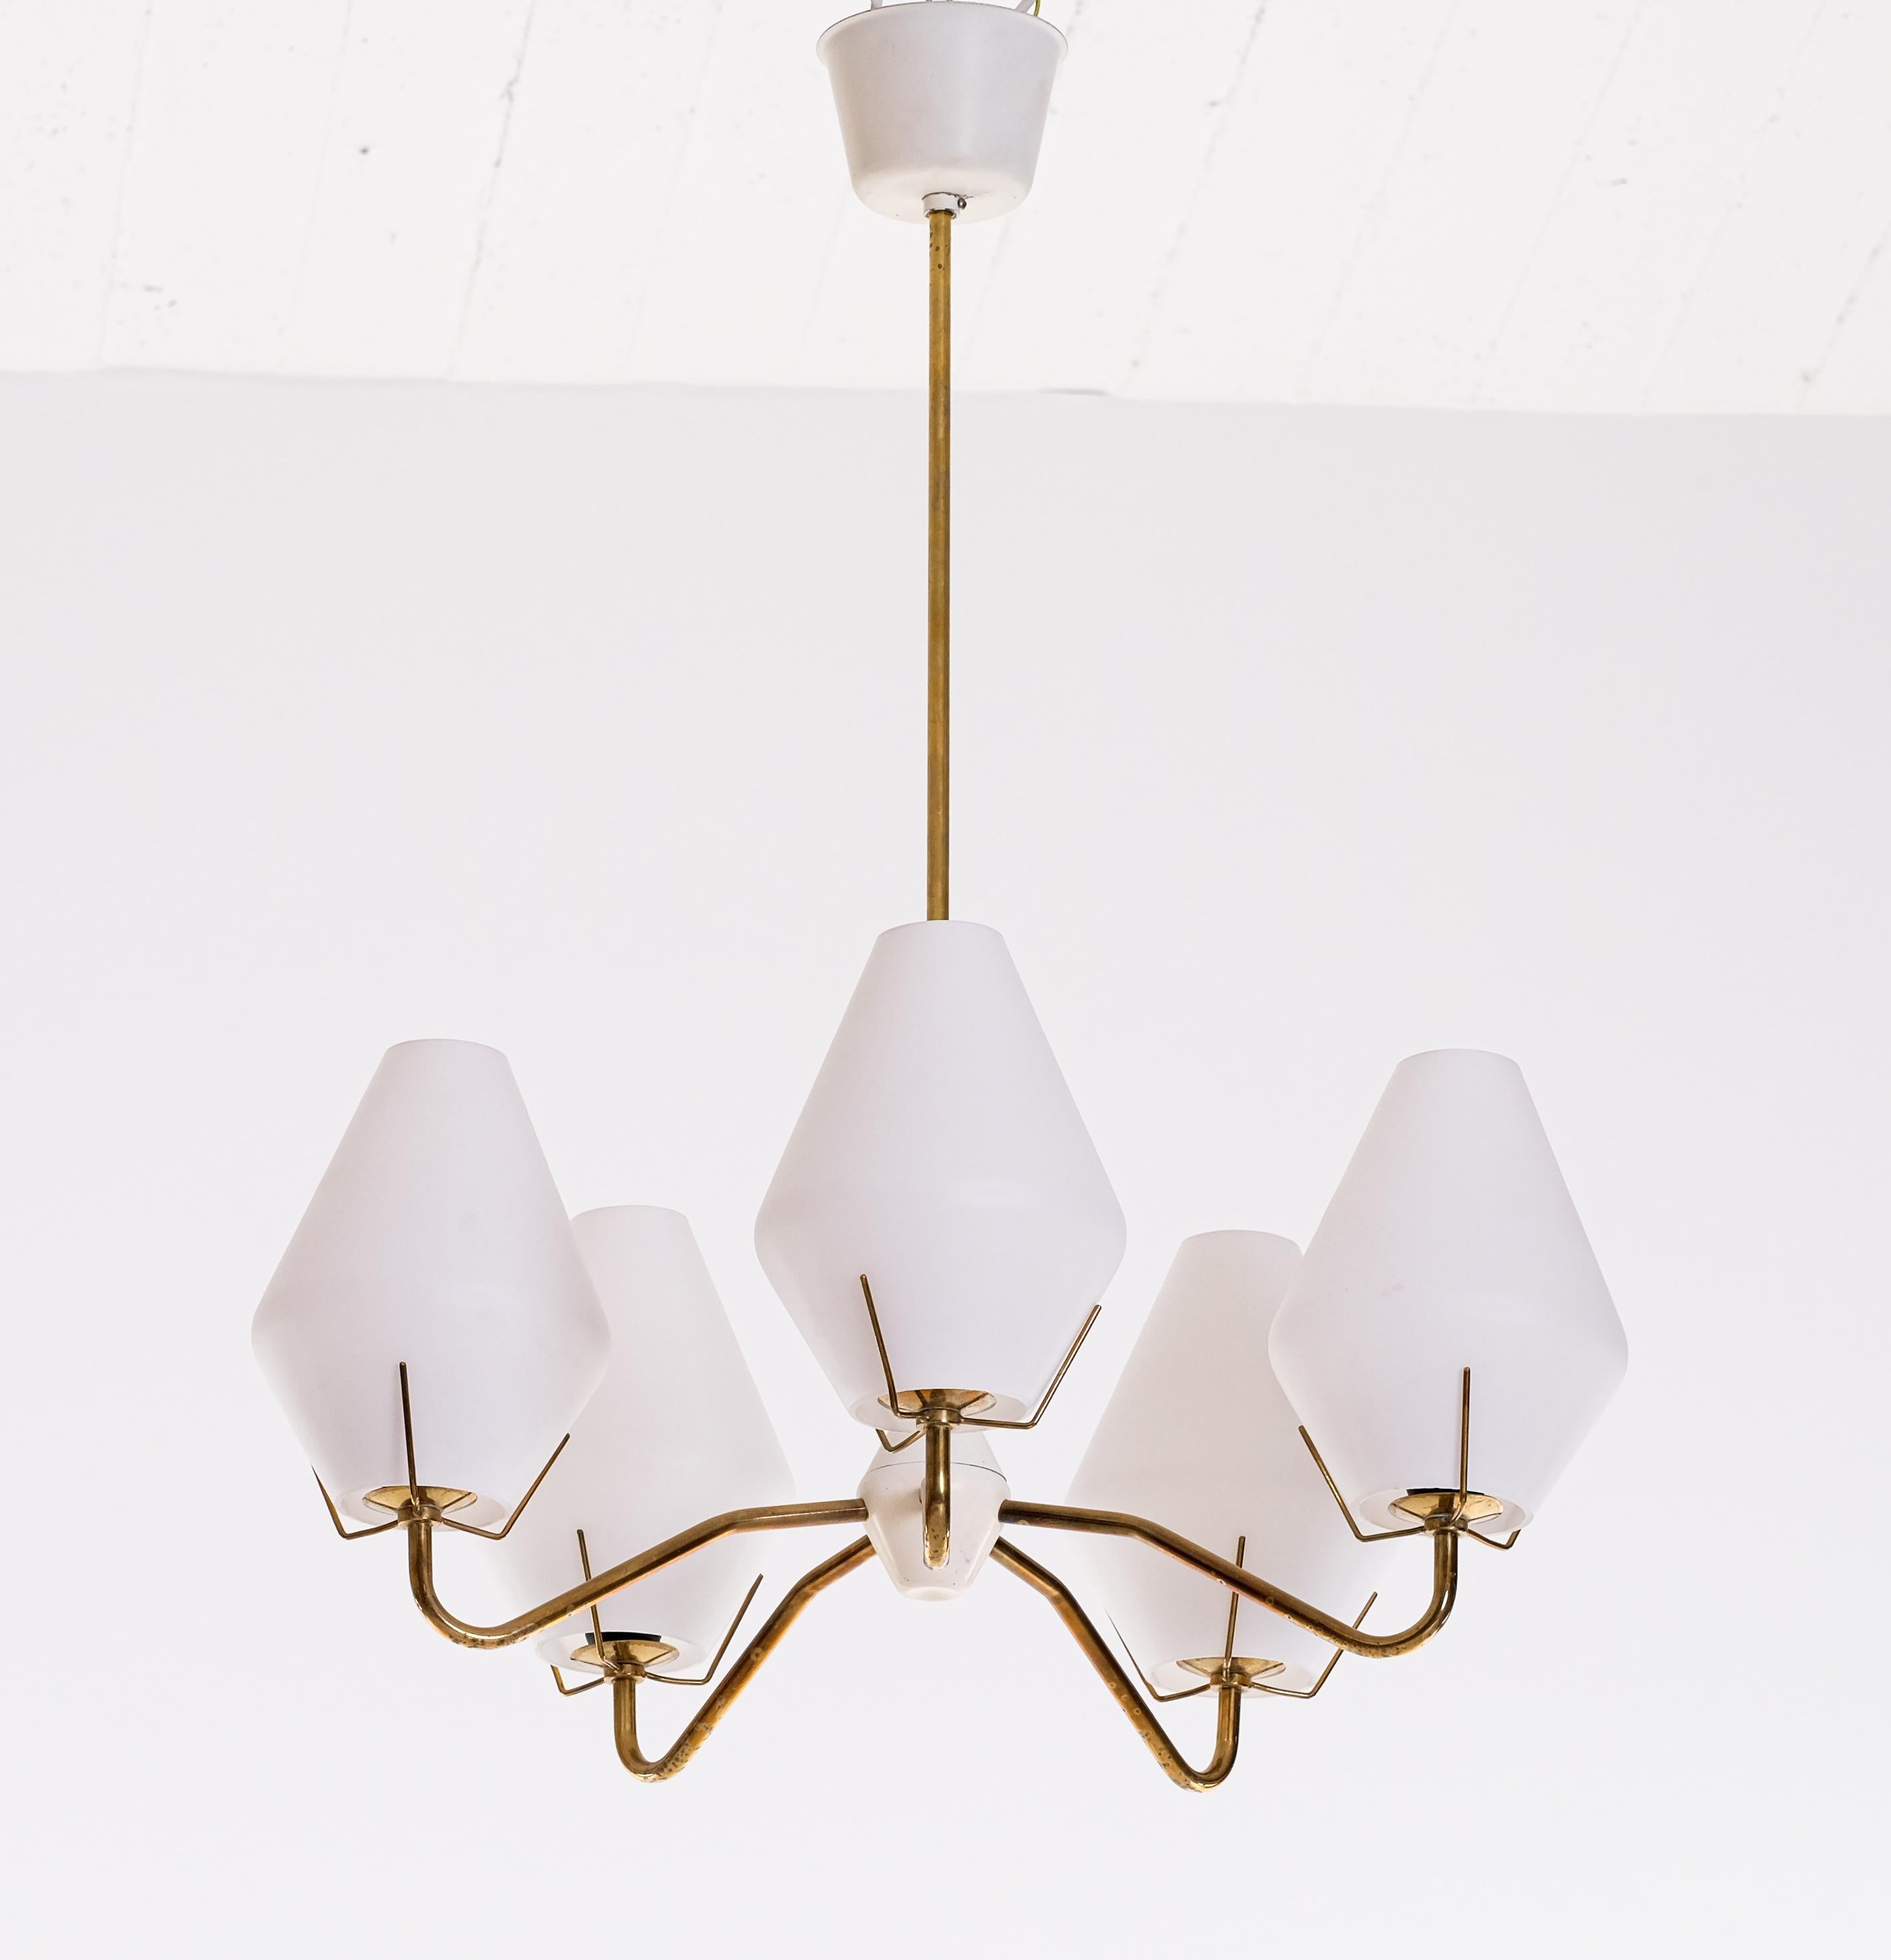 Set of 2 Brass Chandeliers by ASEA, Sweden, 1950s For Sale 4